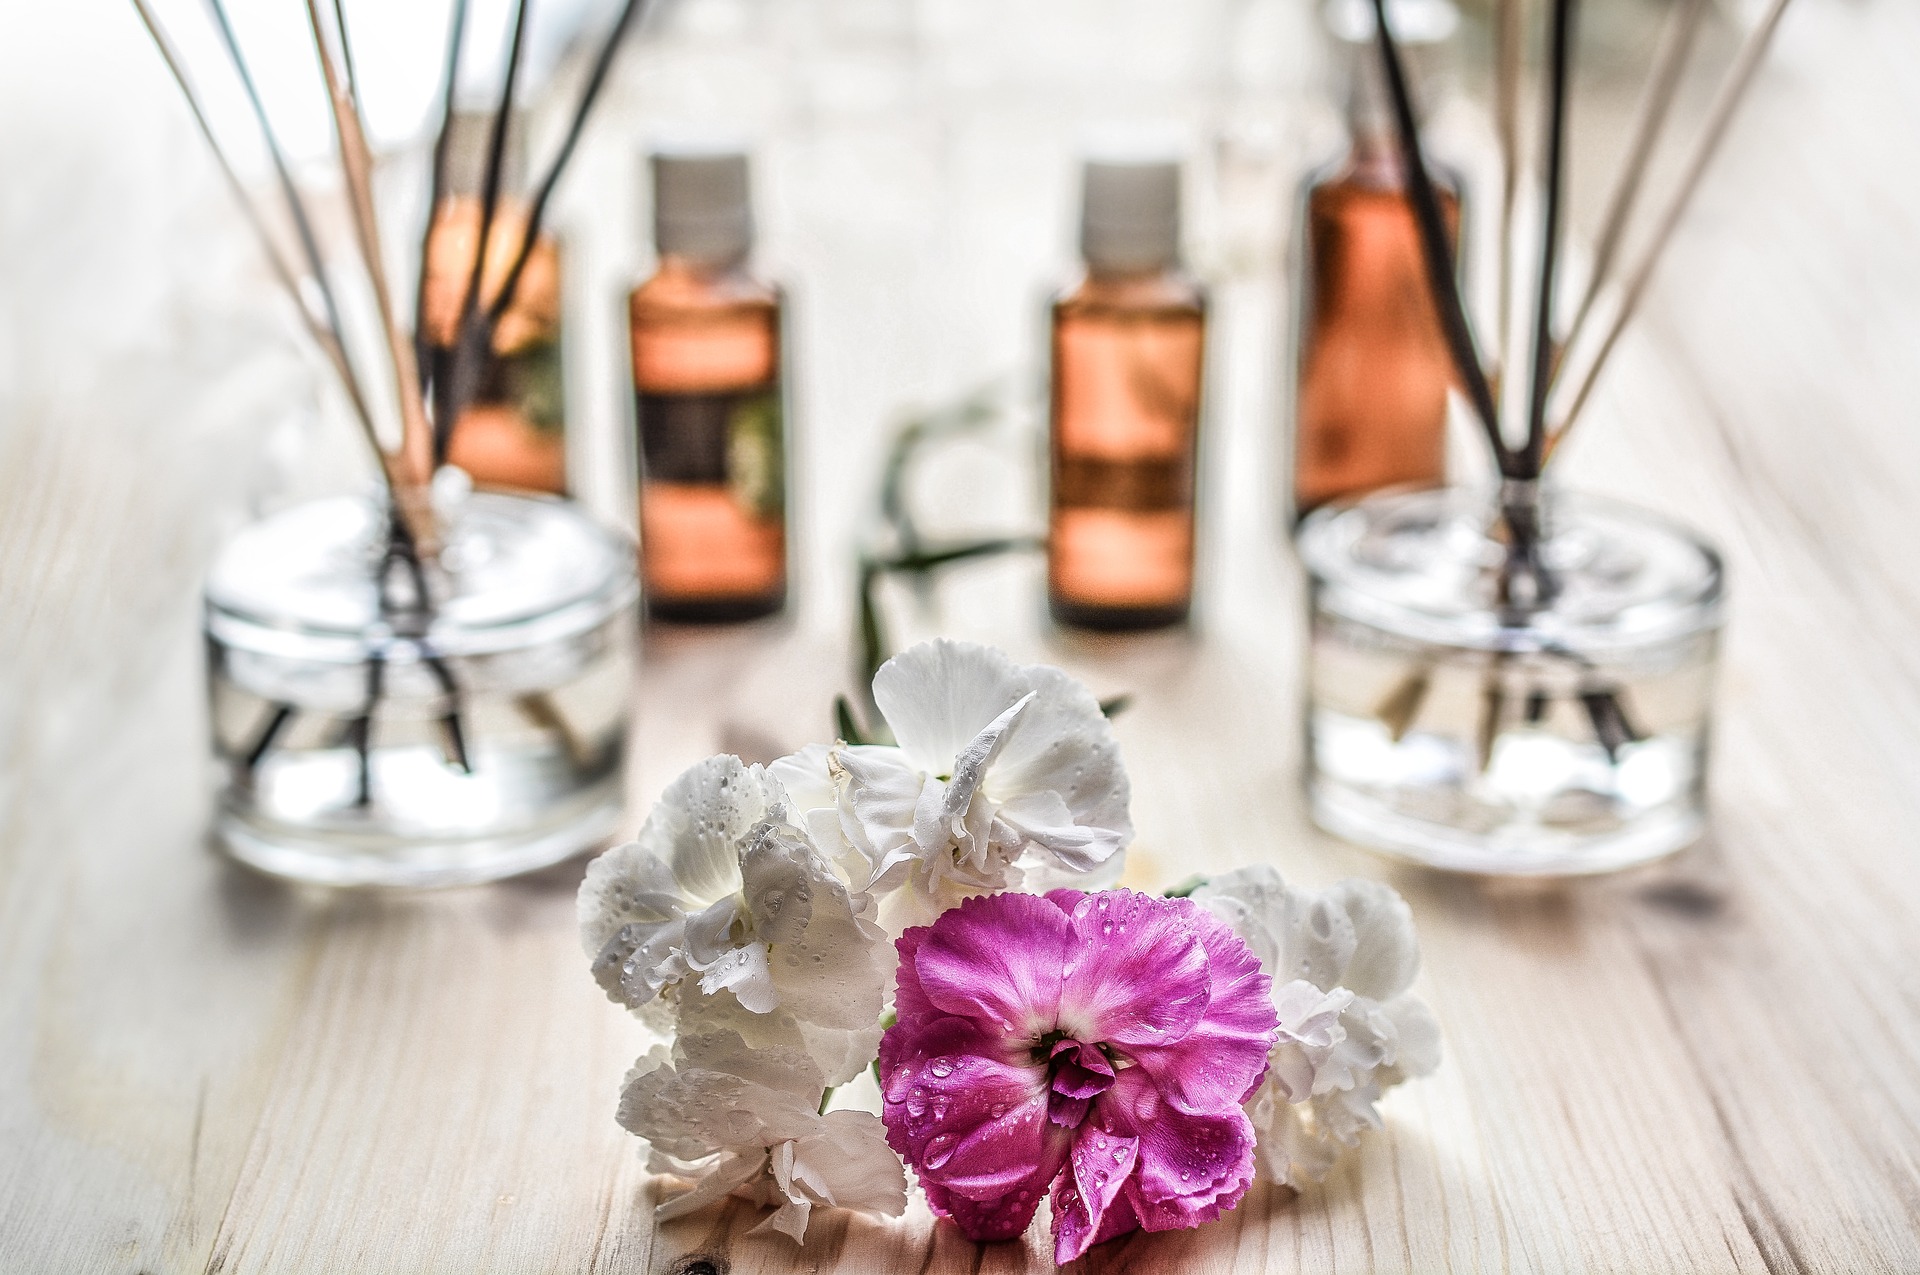 Decor with Reed diffusers and flowers on a wooden table.